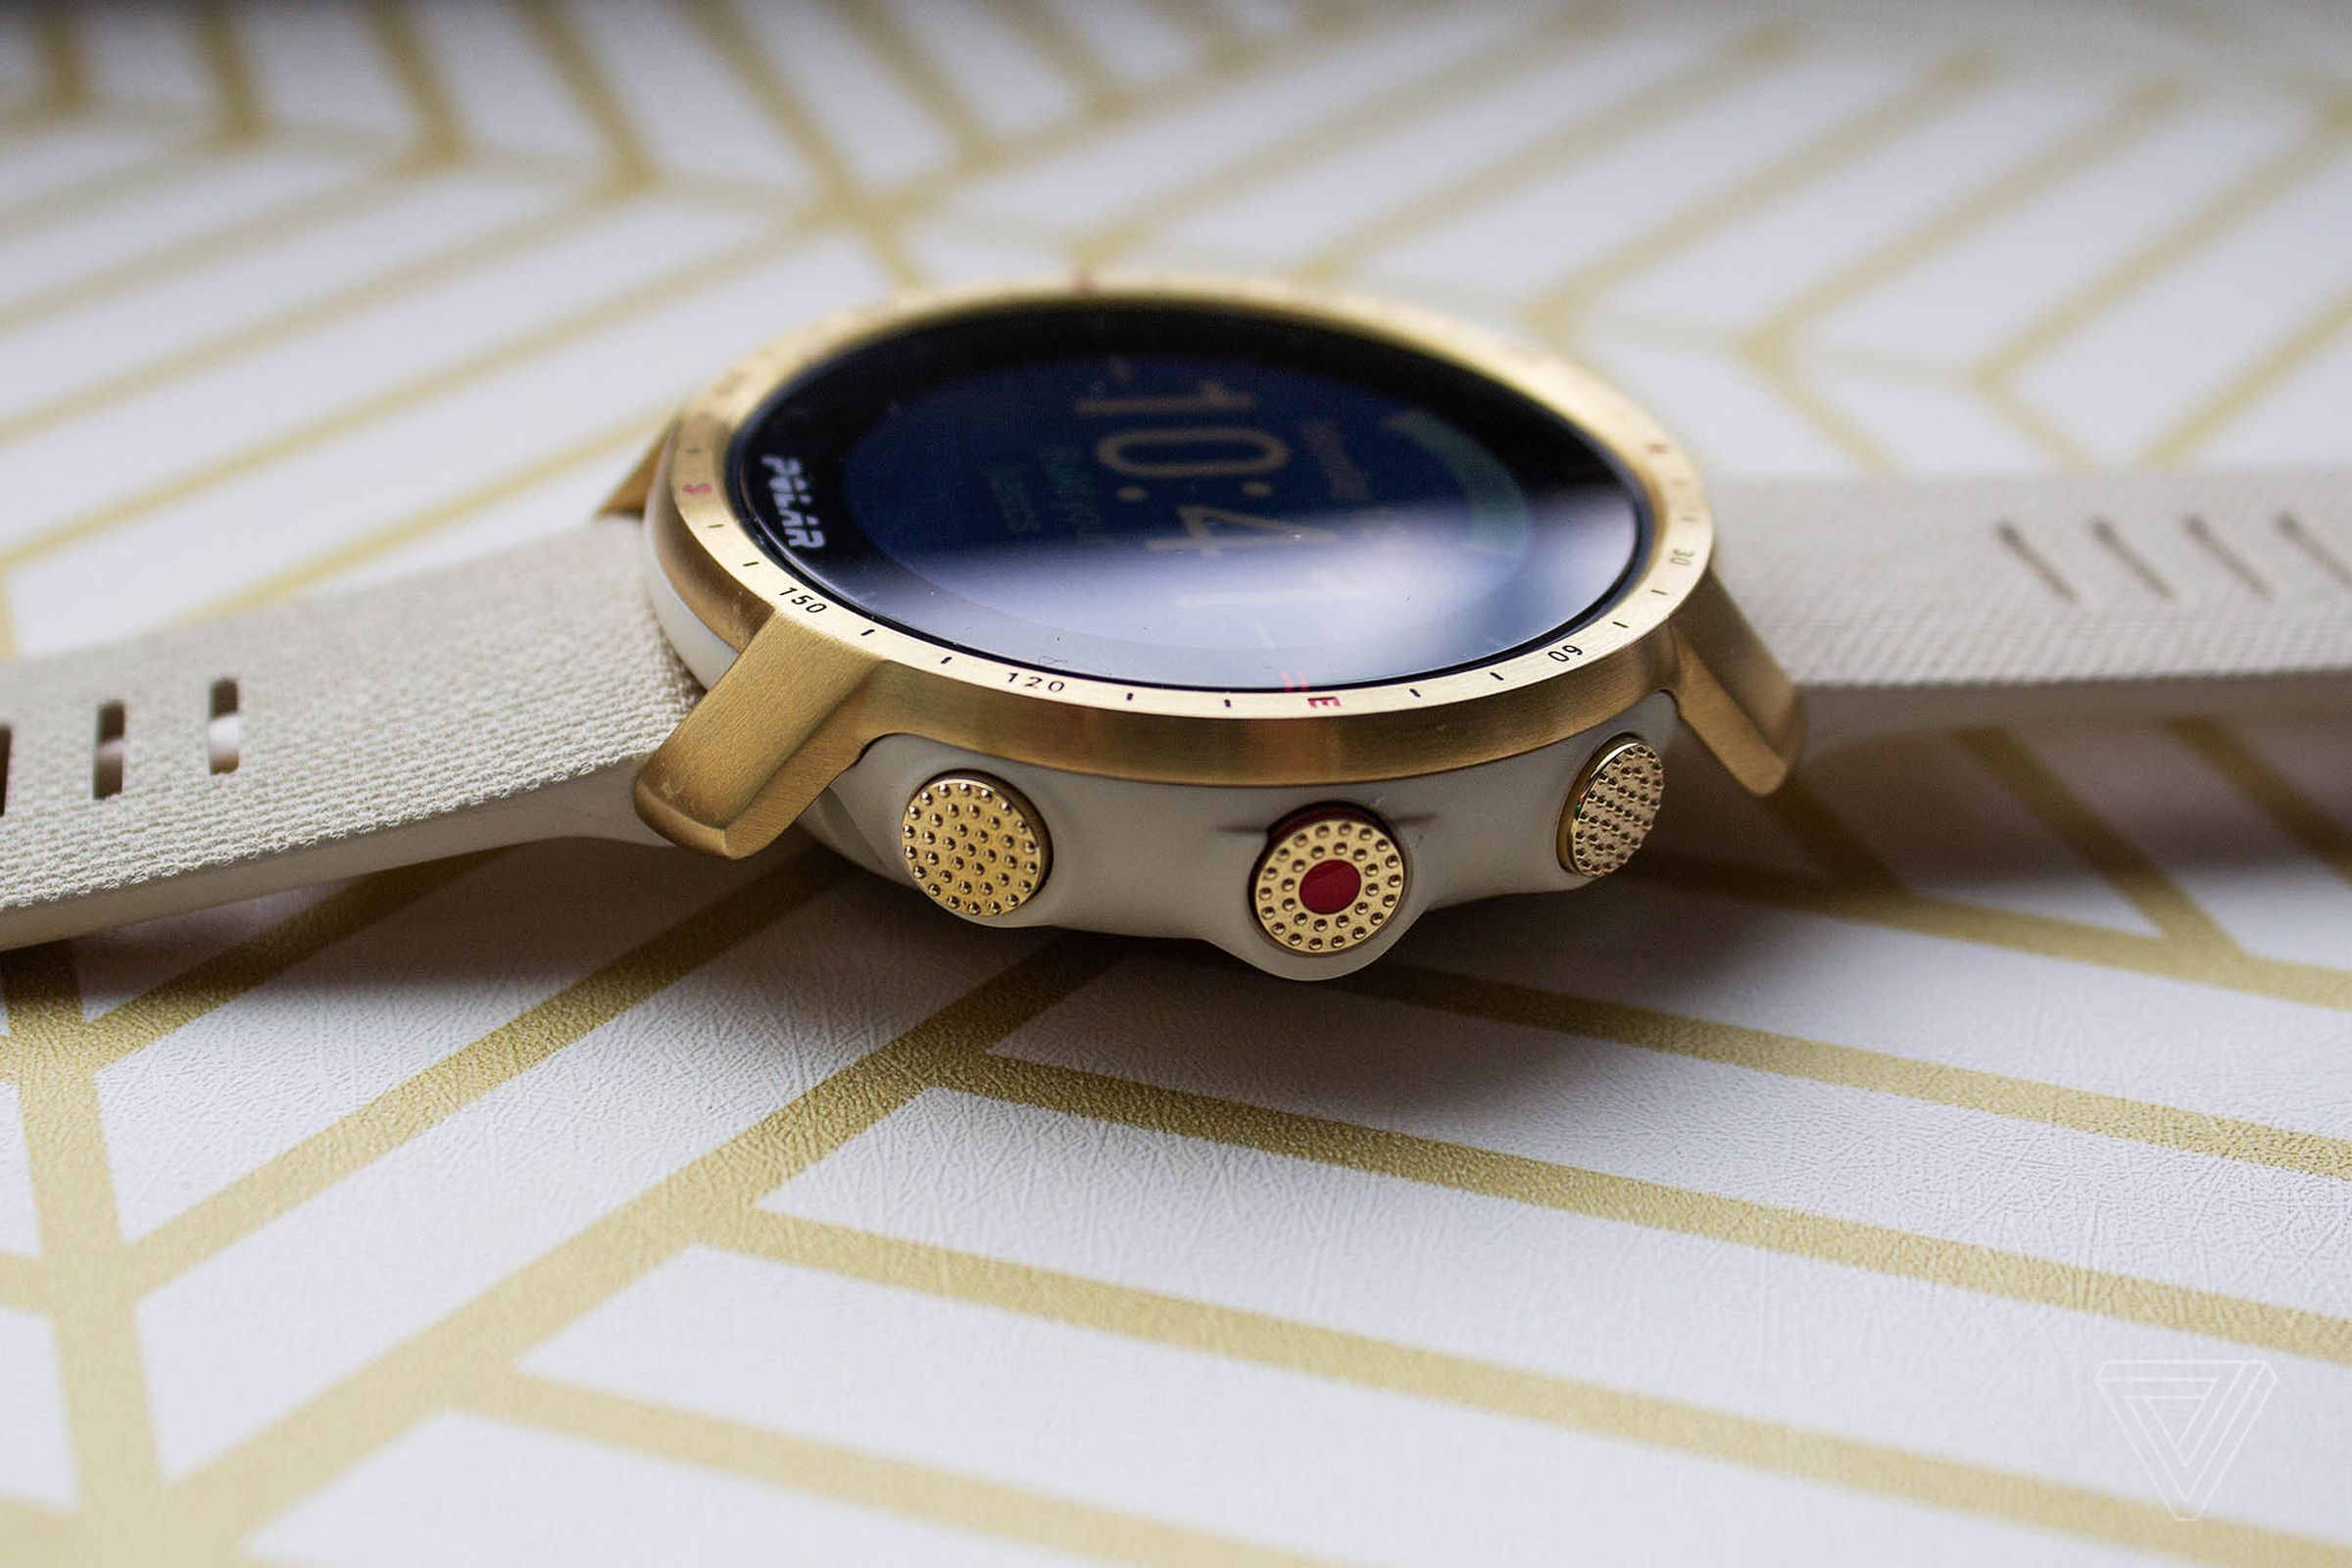 You can see the compass etchings on the bezel, as well as three of the watch’s five physical buttons.